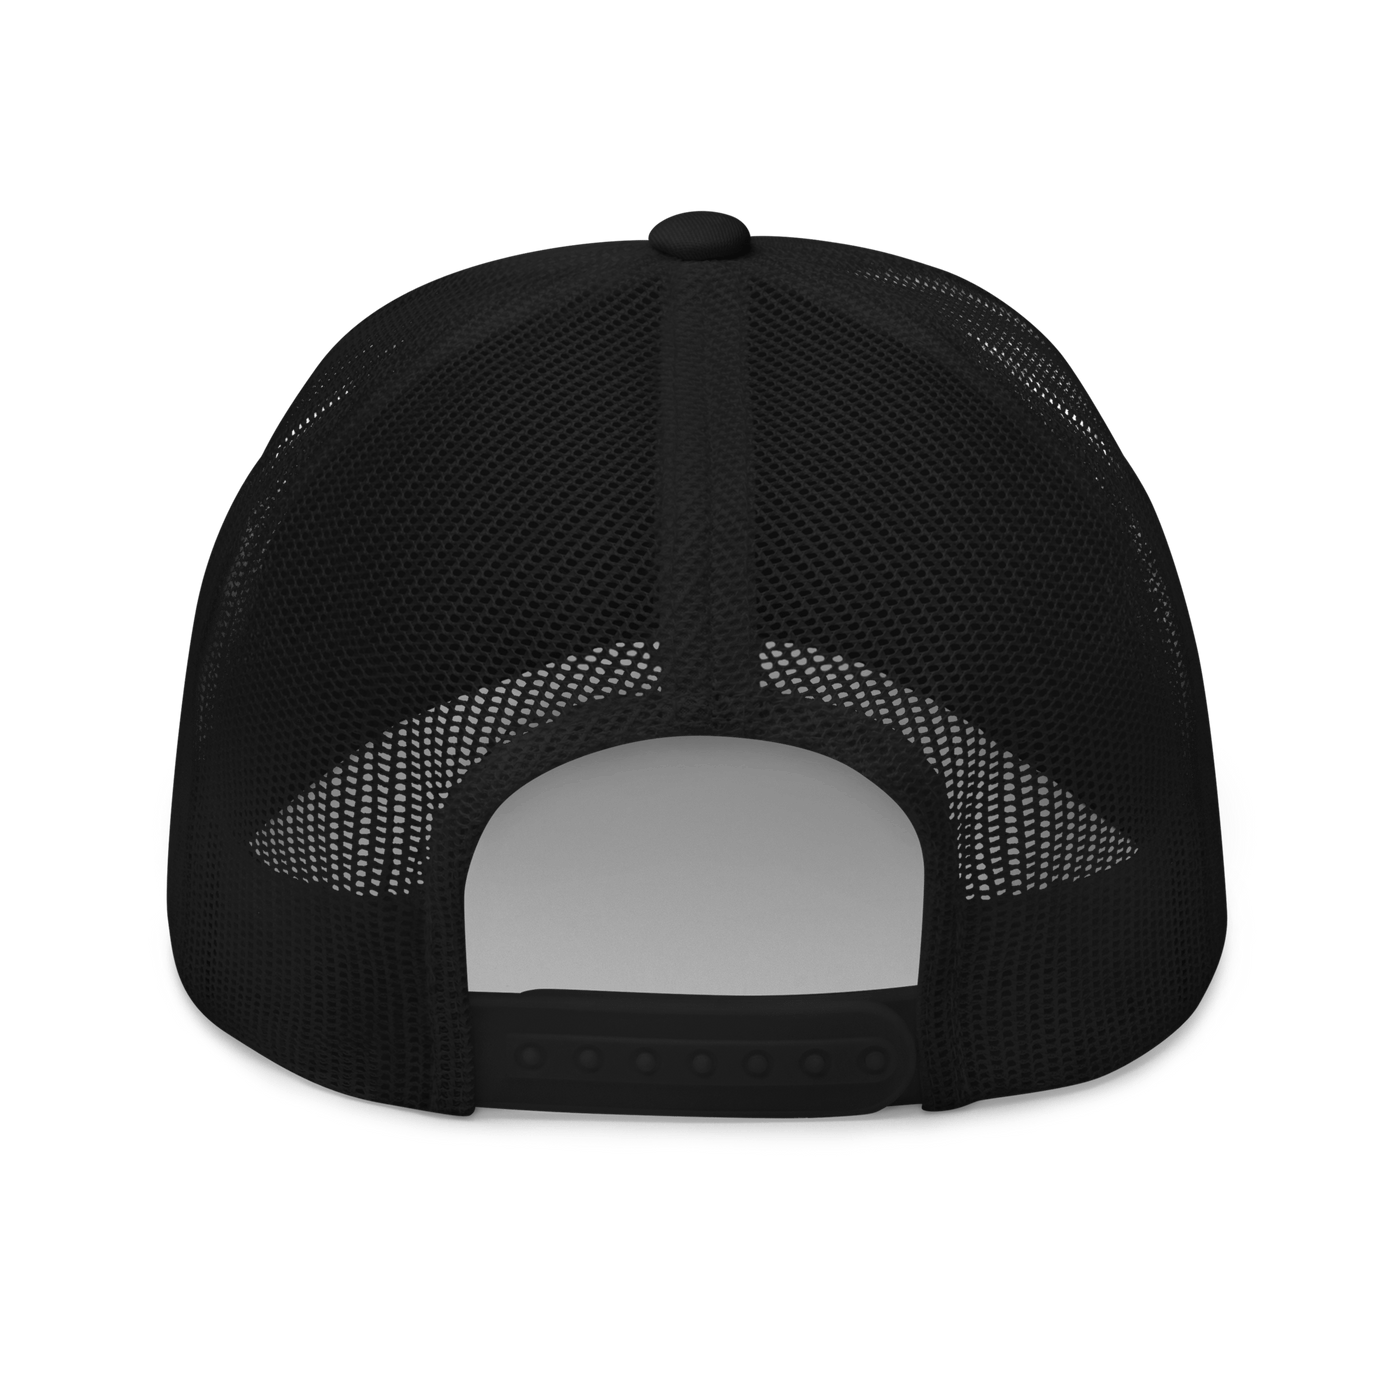 Fish & Chips Trucker Cap - Black - - Just Another Cap Store